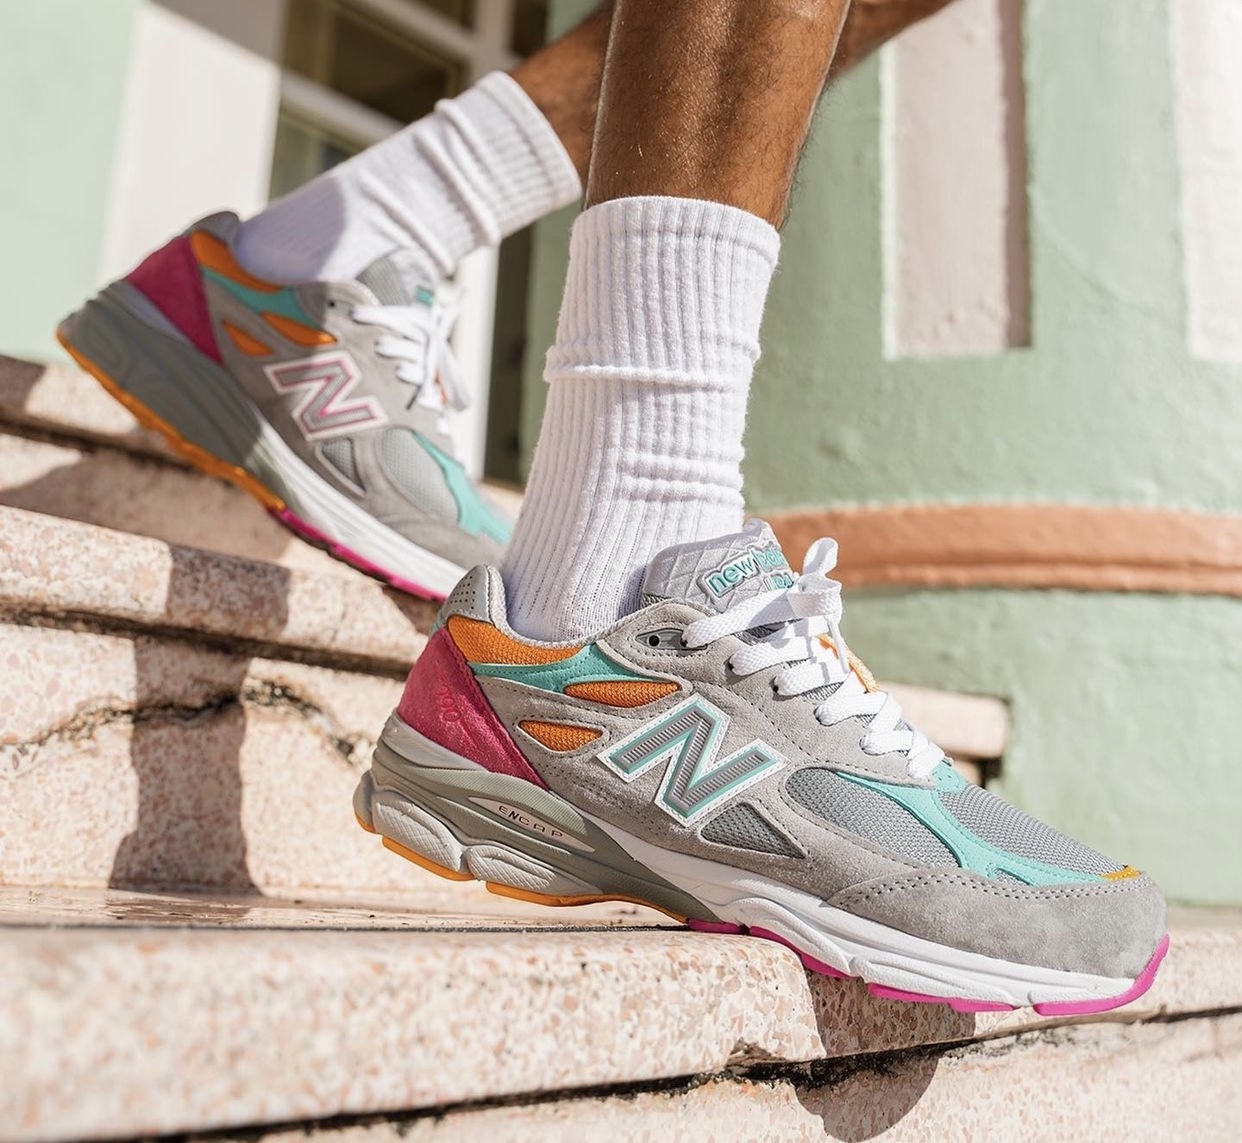 DTLR x New Balance 990v3 Miami Drive Release Date | SBD